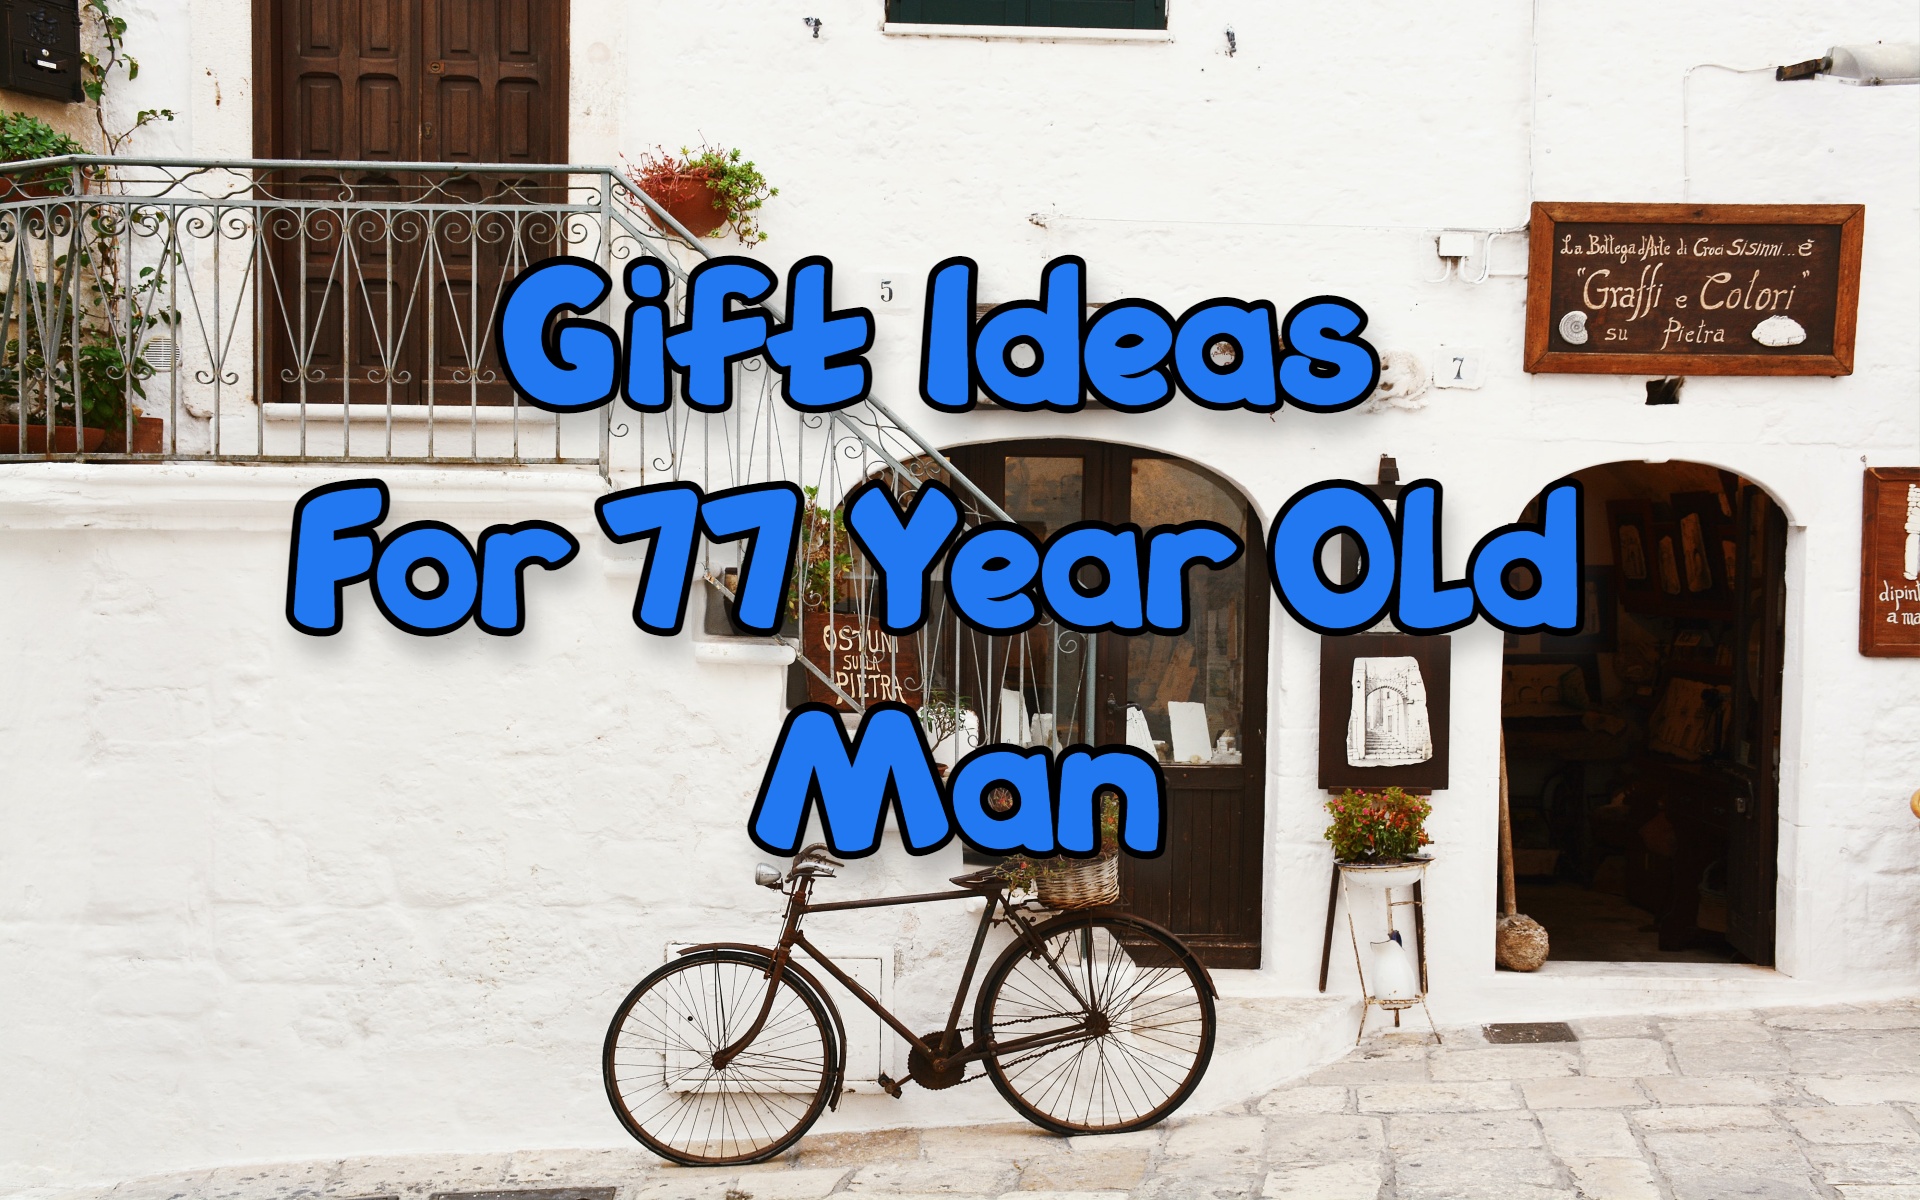 Cover image of gift ideas for 77-year-old man by Giftsedge